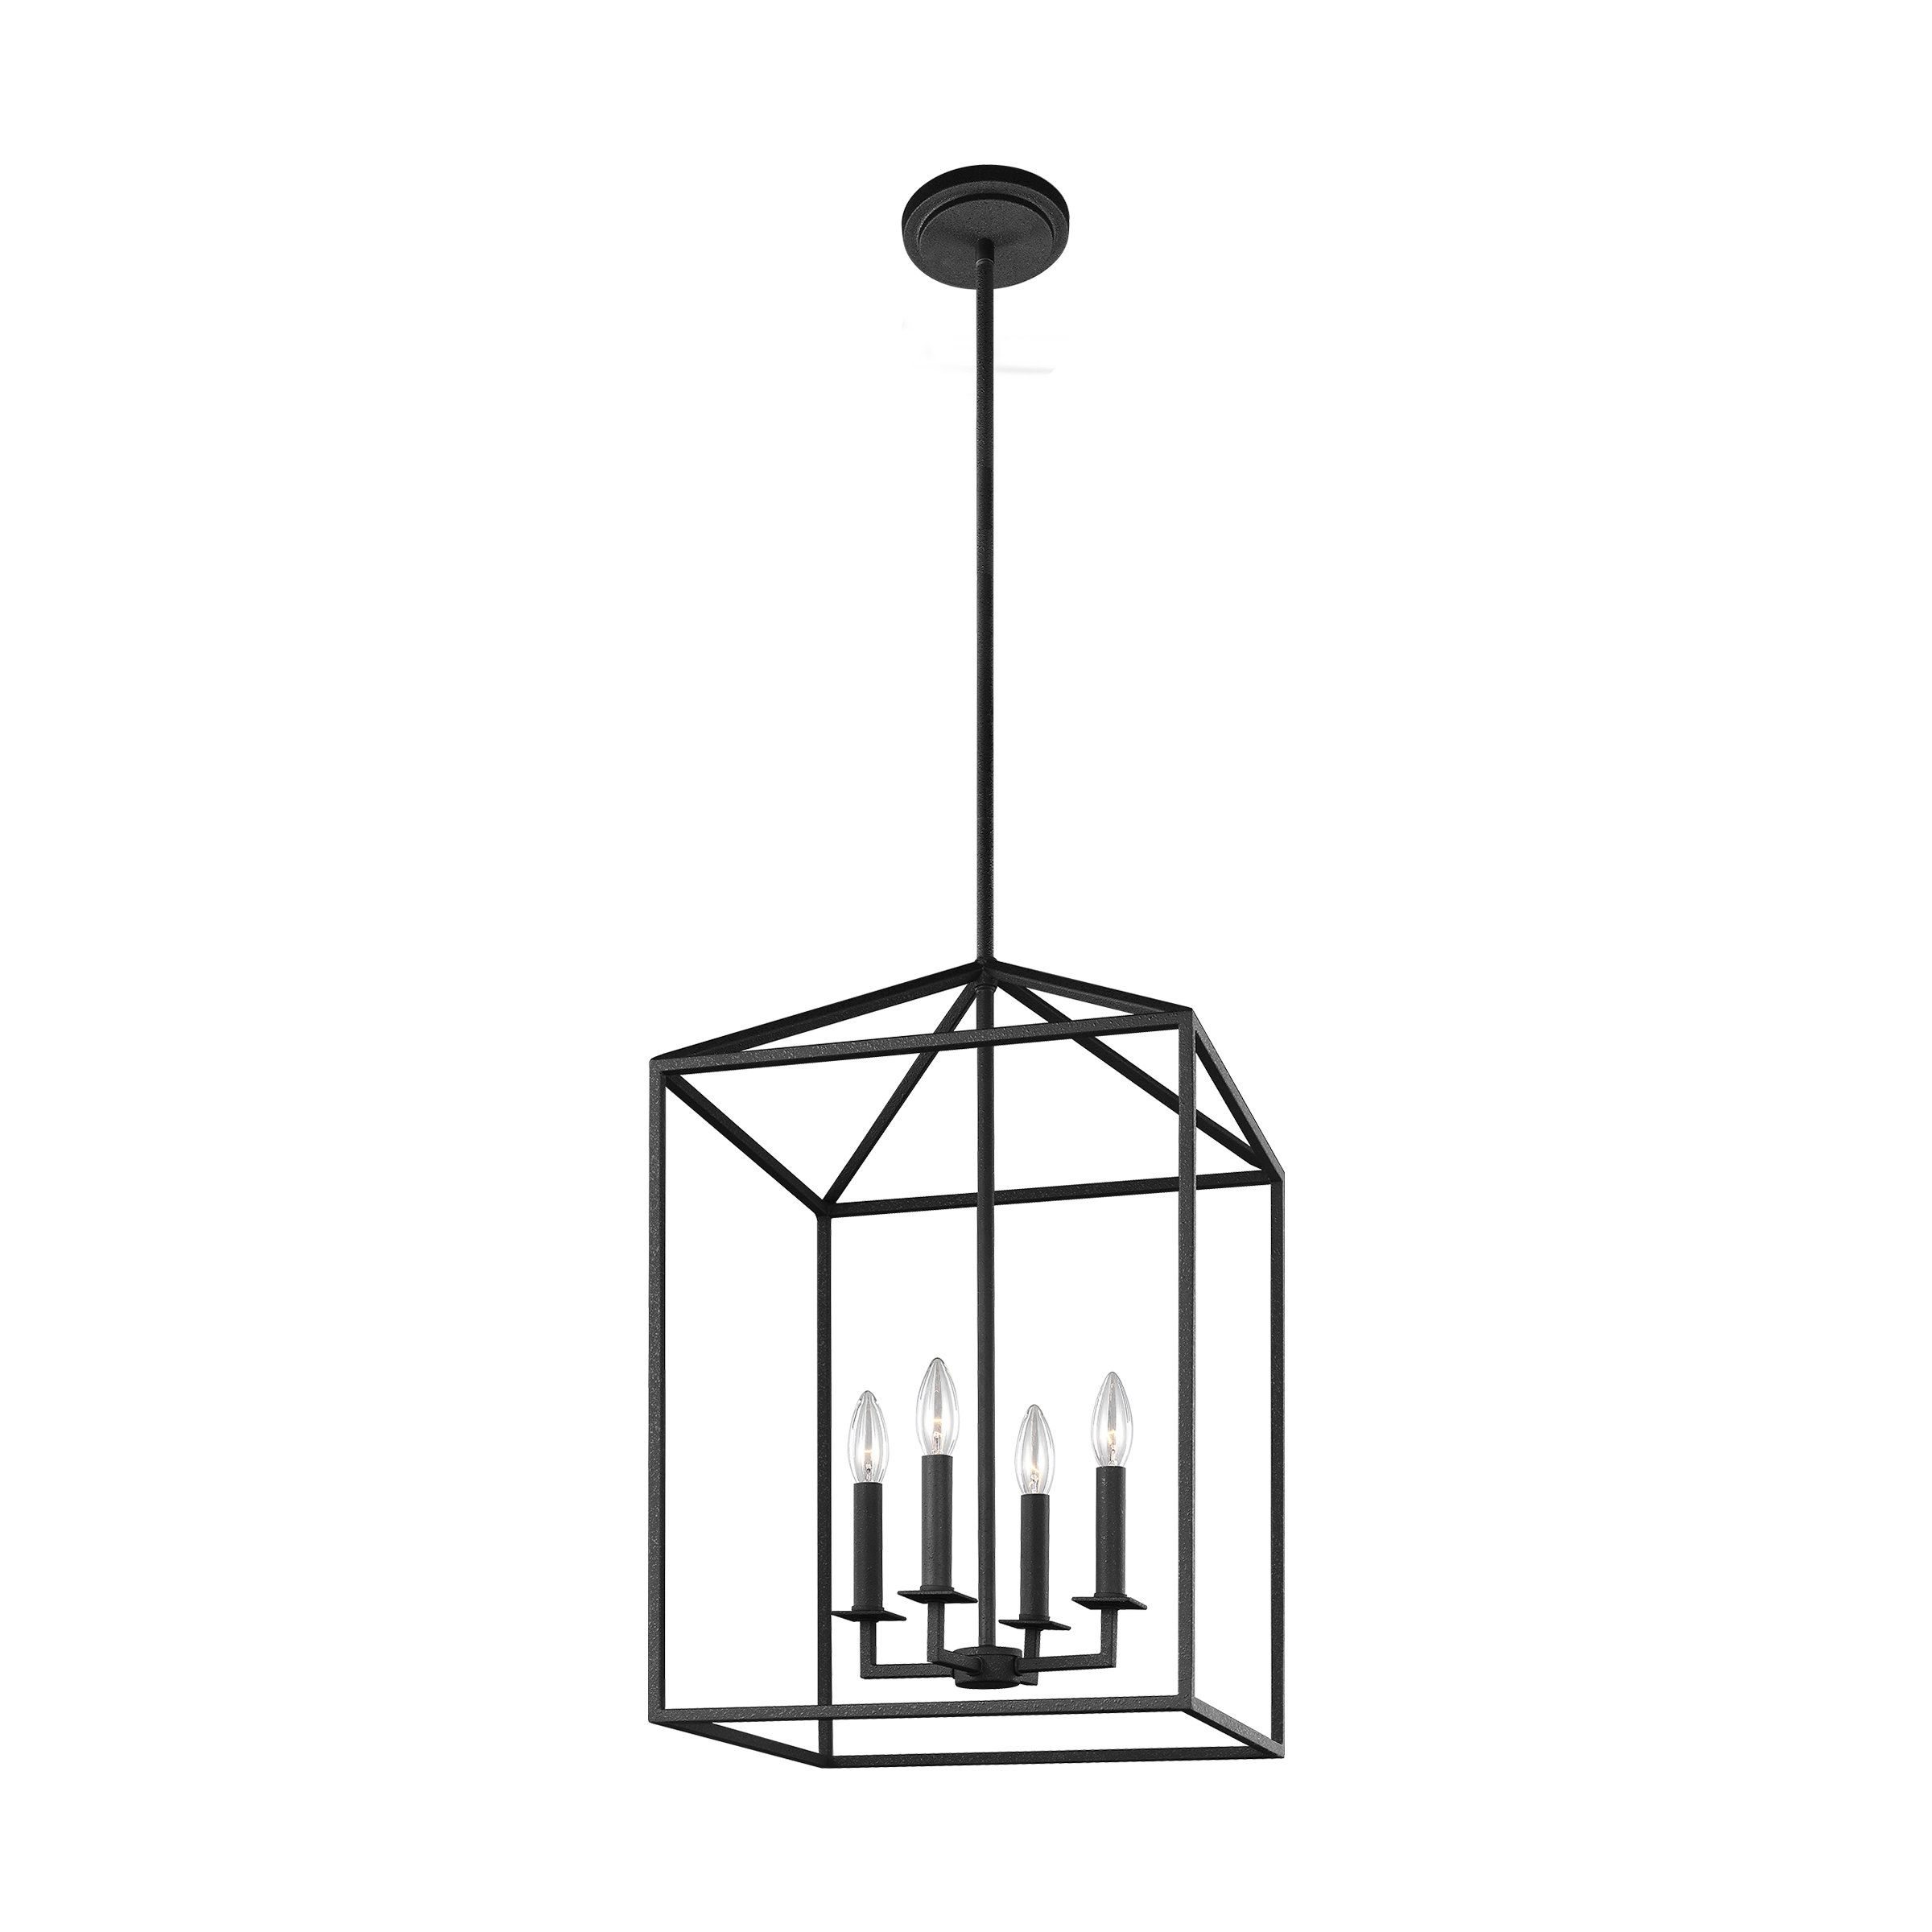 Odie 4 Light Lantern Square Pendants Throughout Current Odie 4 Light Lantern Square/rectangle Pendant (View 1 of 25)